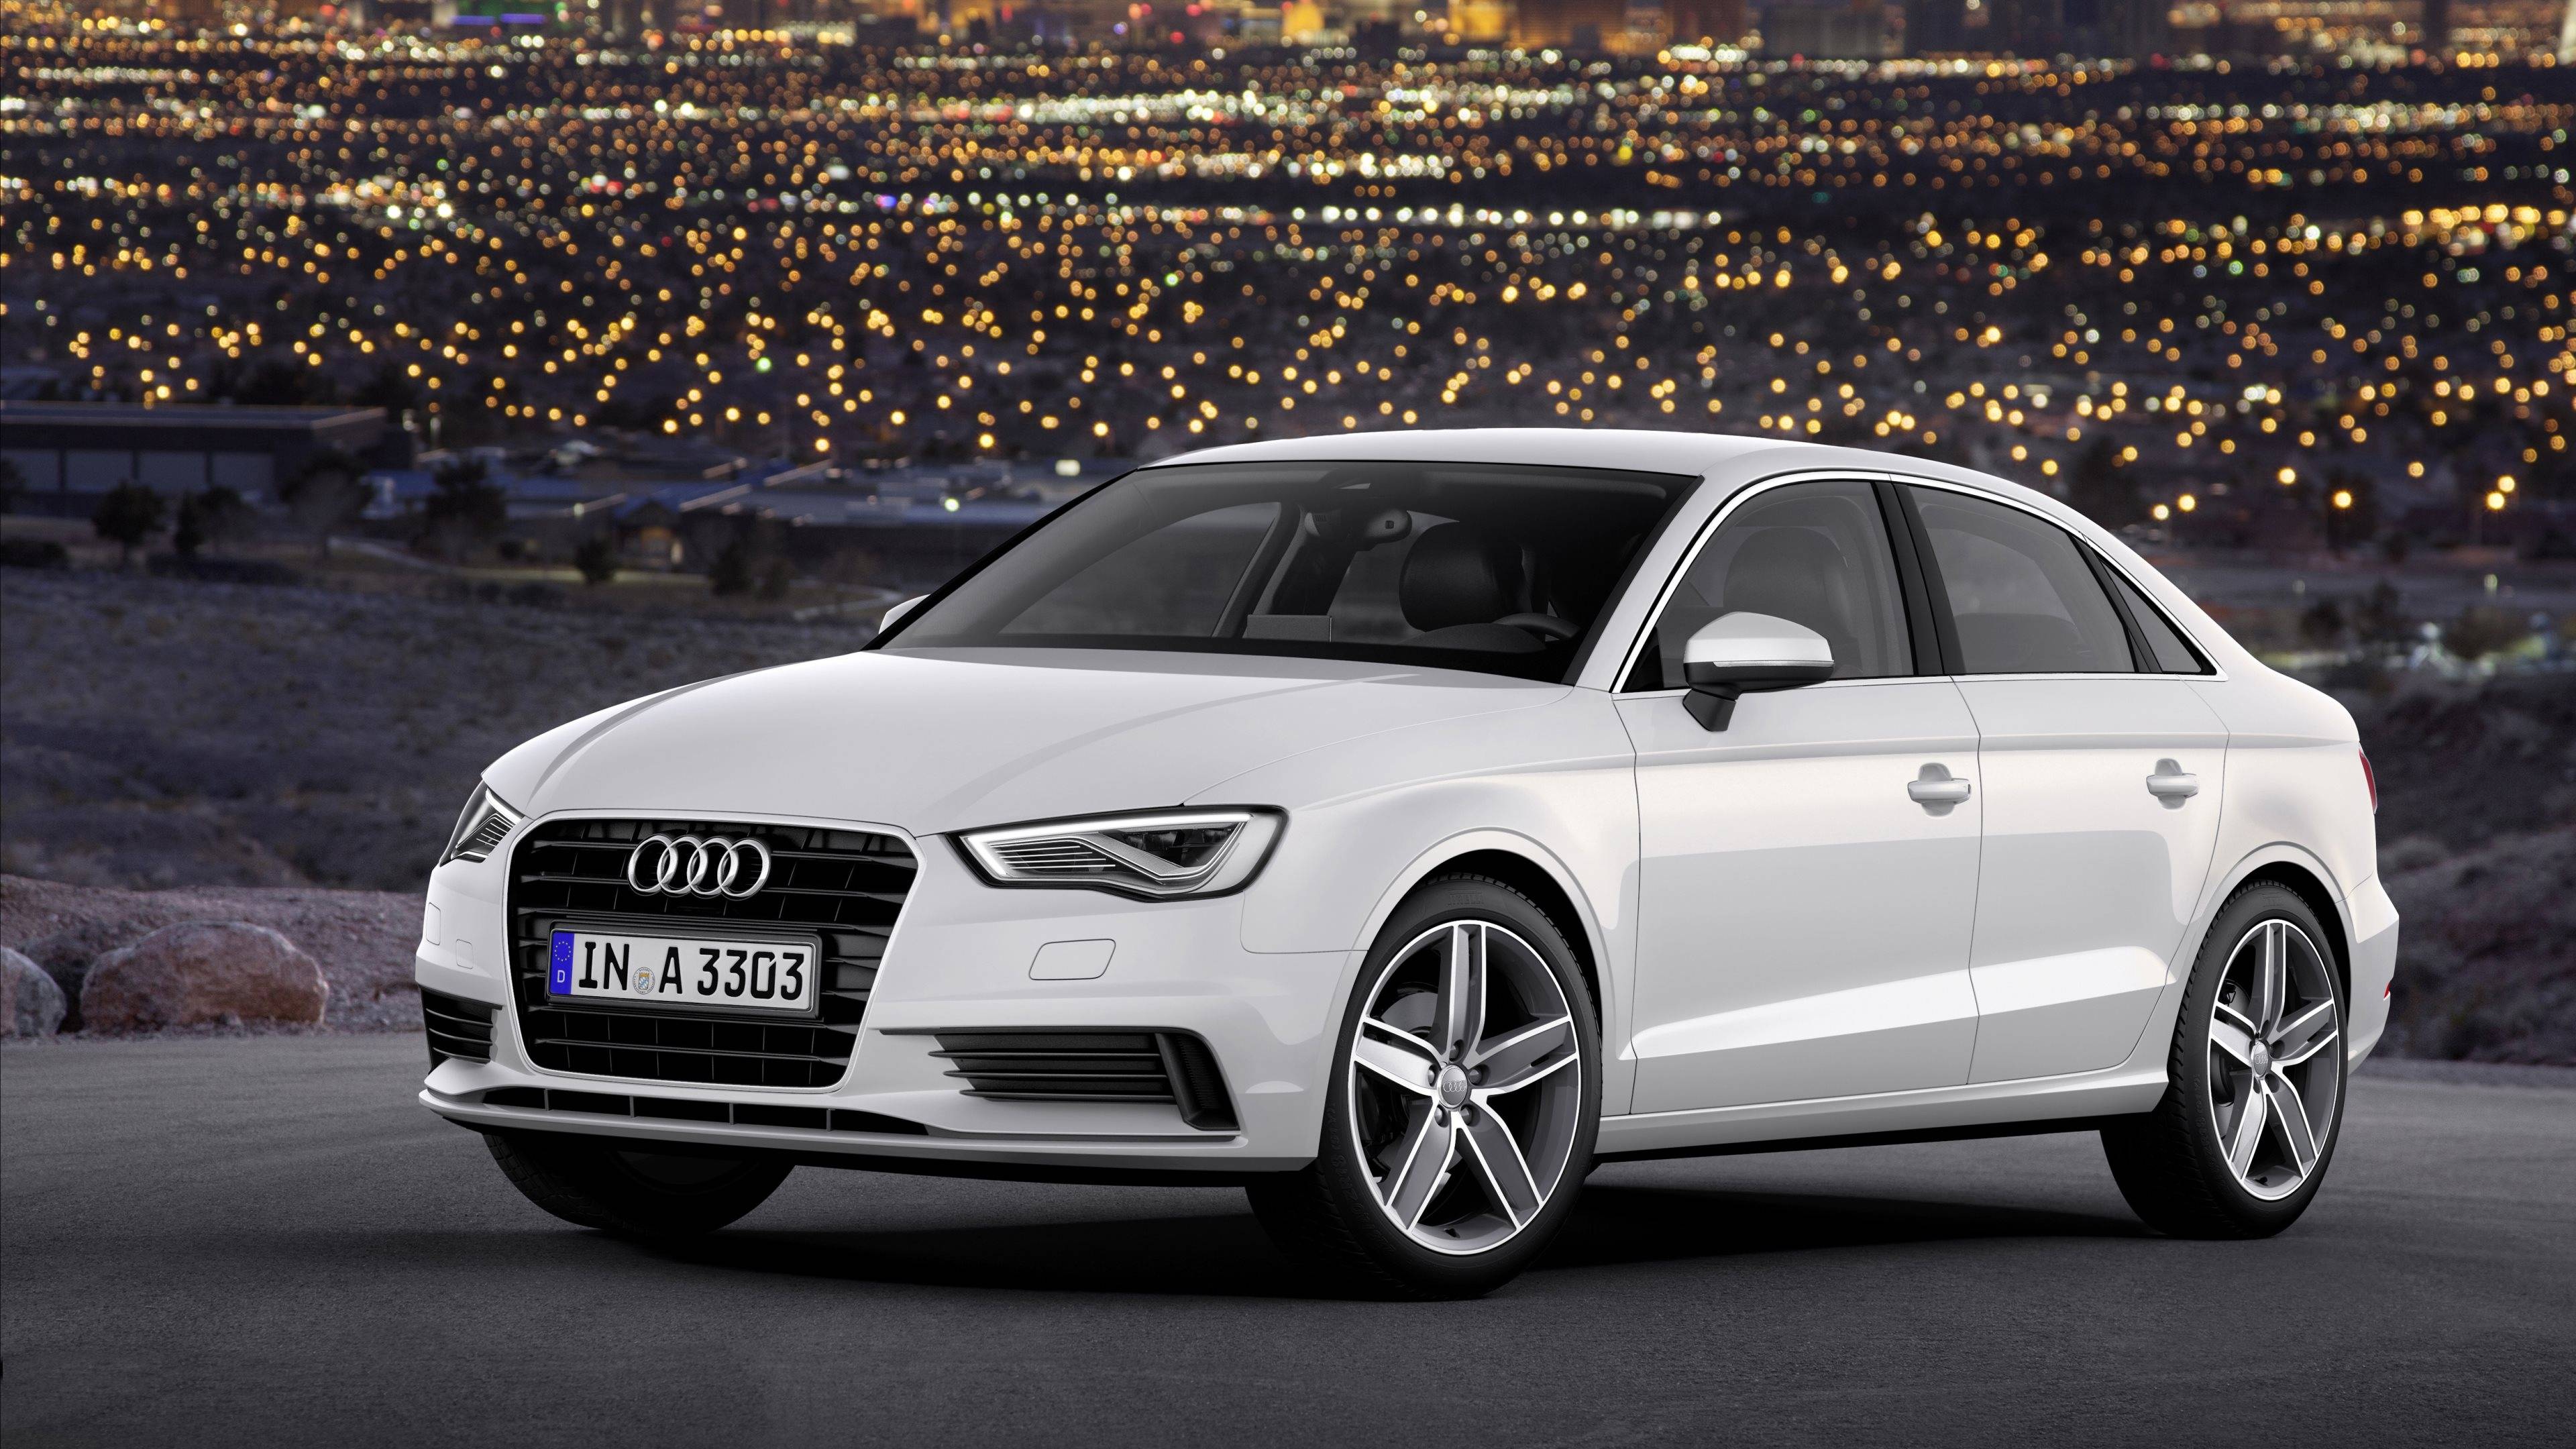 Nothing found for 2015 Audi A3 Sedan New Cars